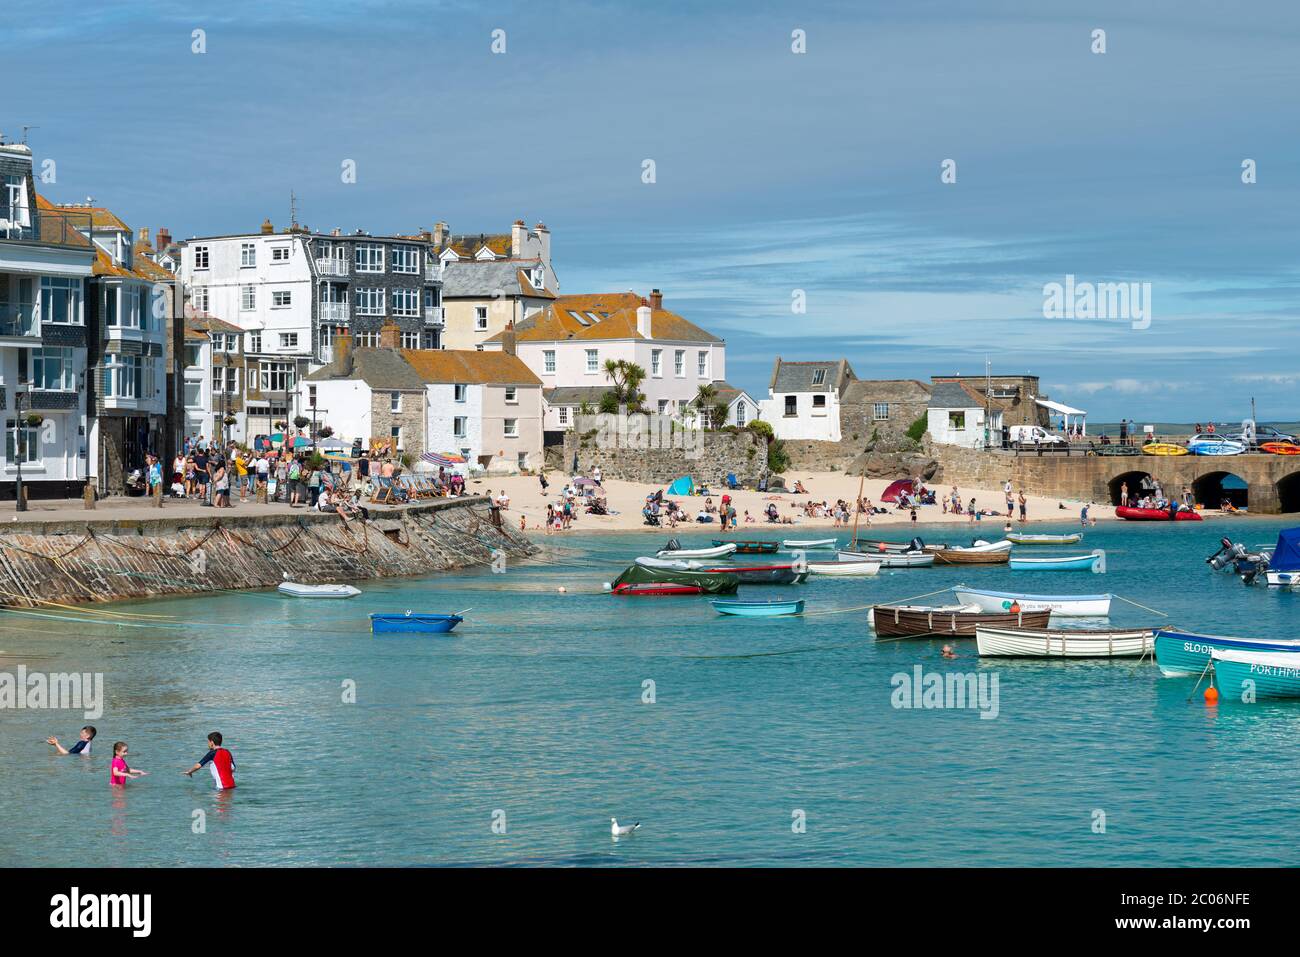 Saint Ives, Cornwall, UK. Boats in the harbour at St Ives. Stock Photo